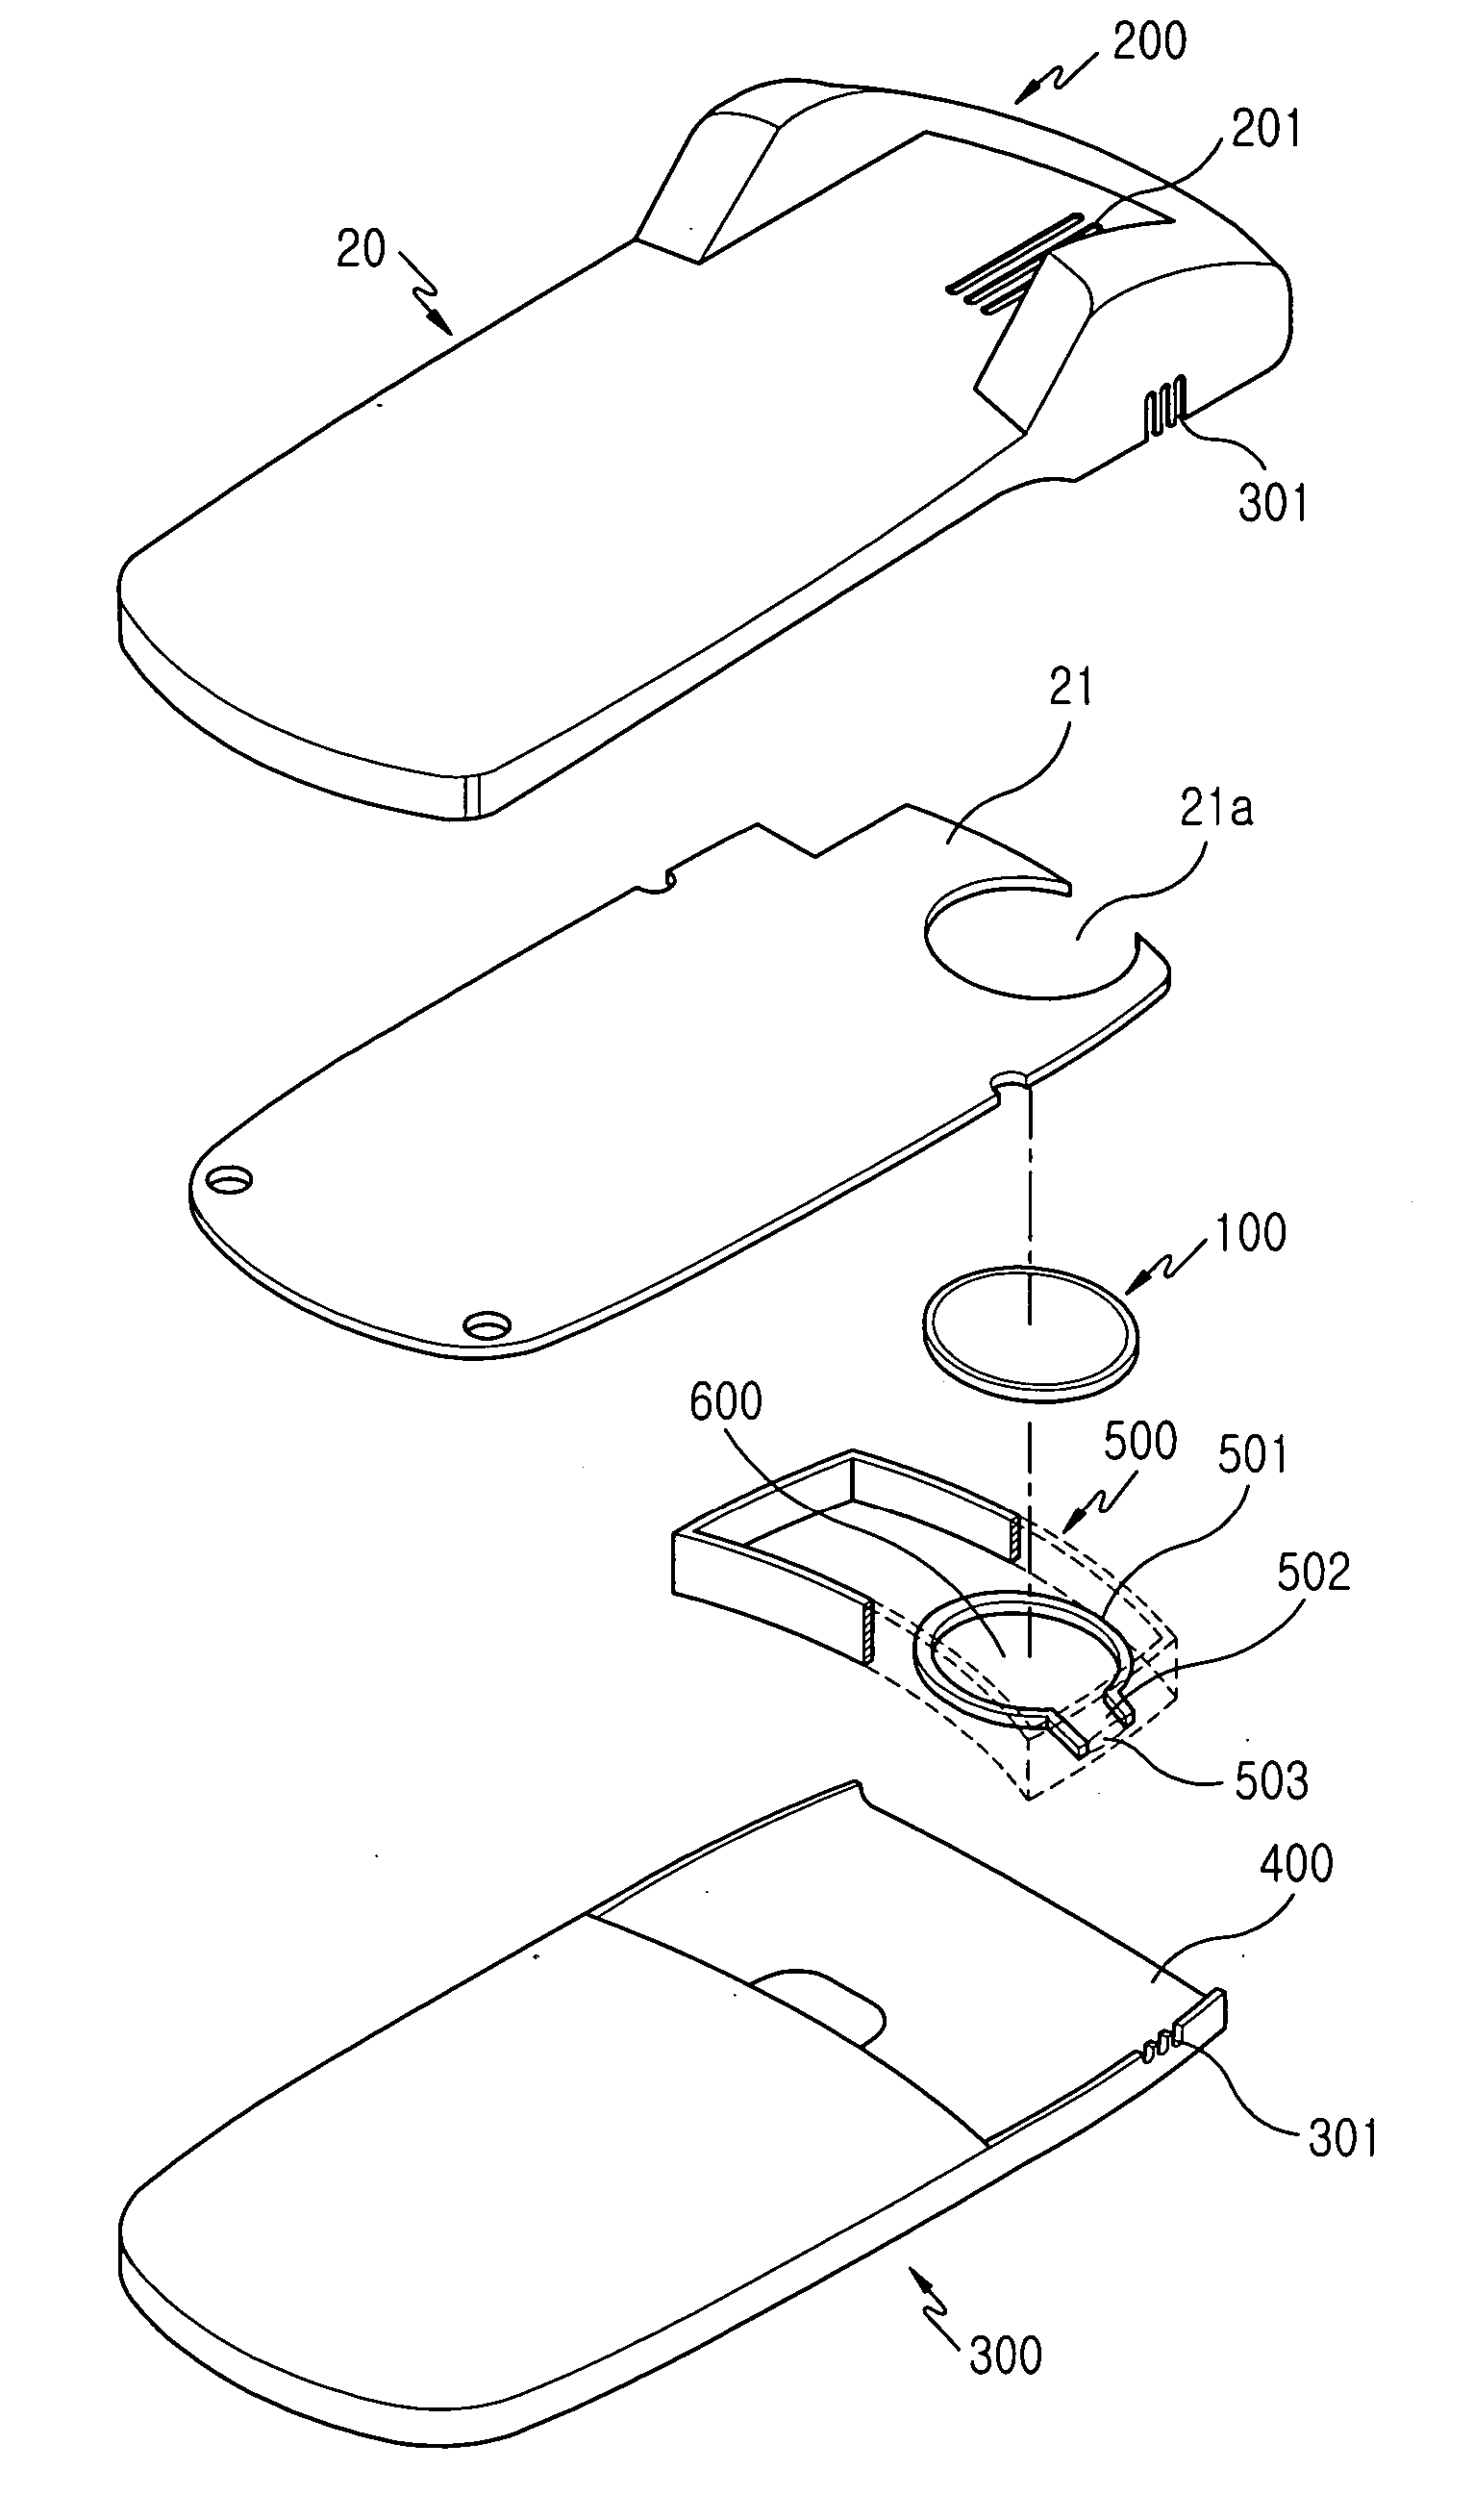 Speaker of a portable terminal having a resonance space